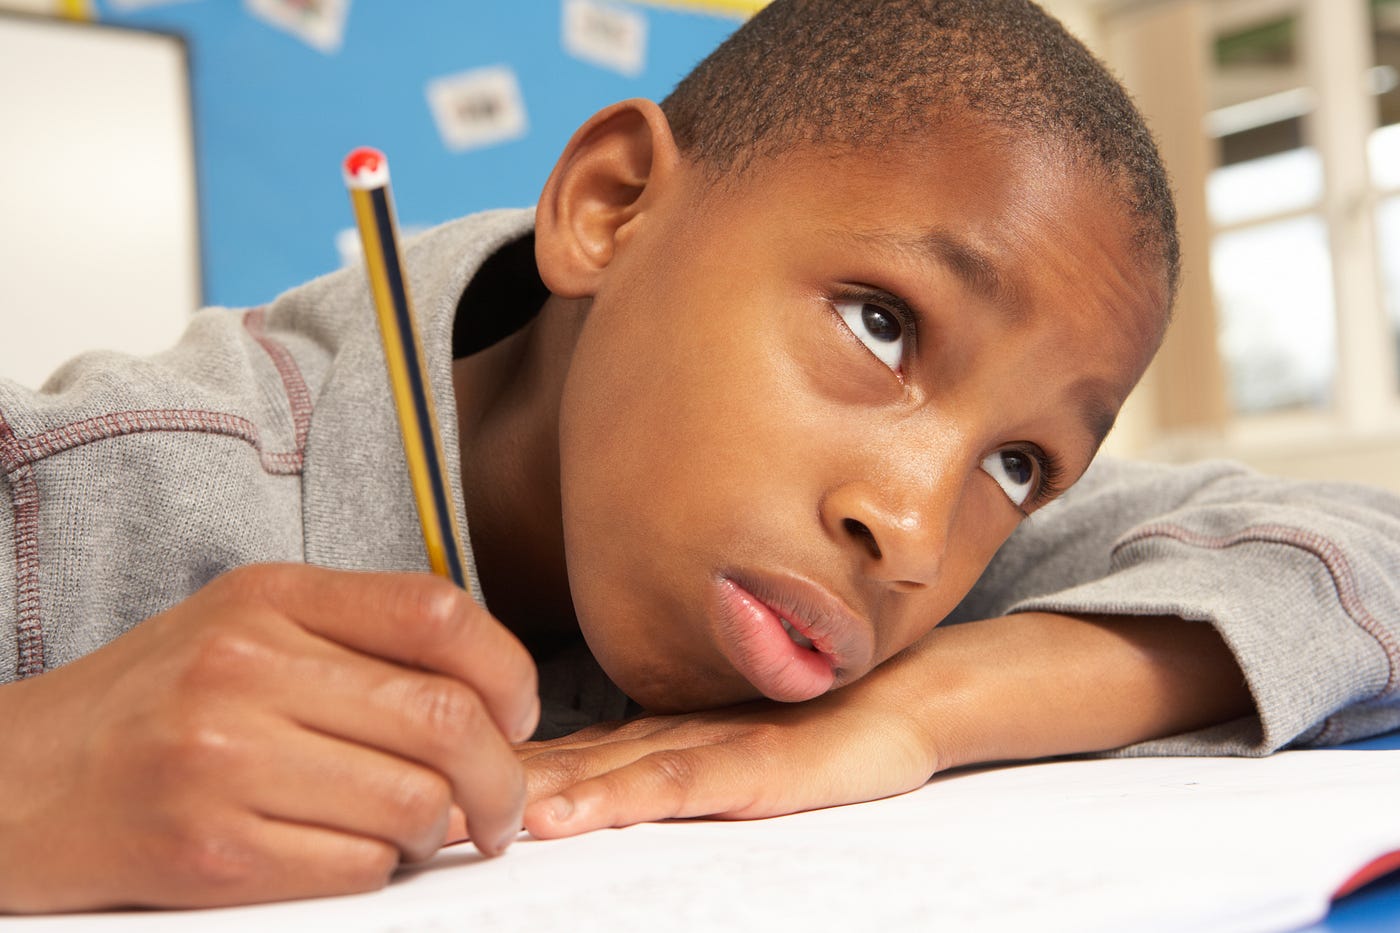 How Kids Can Get Dysgraphia Help in School